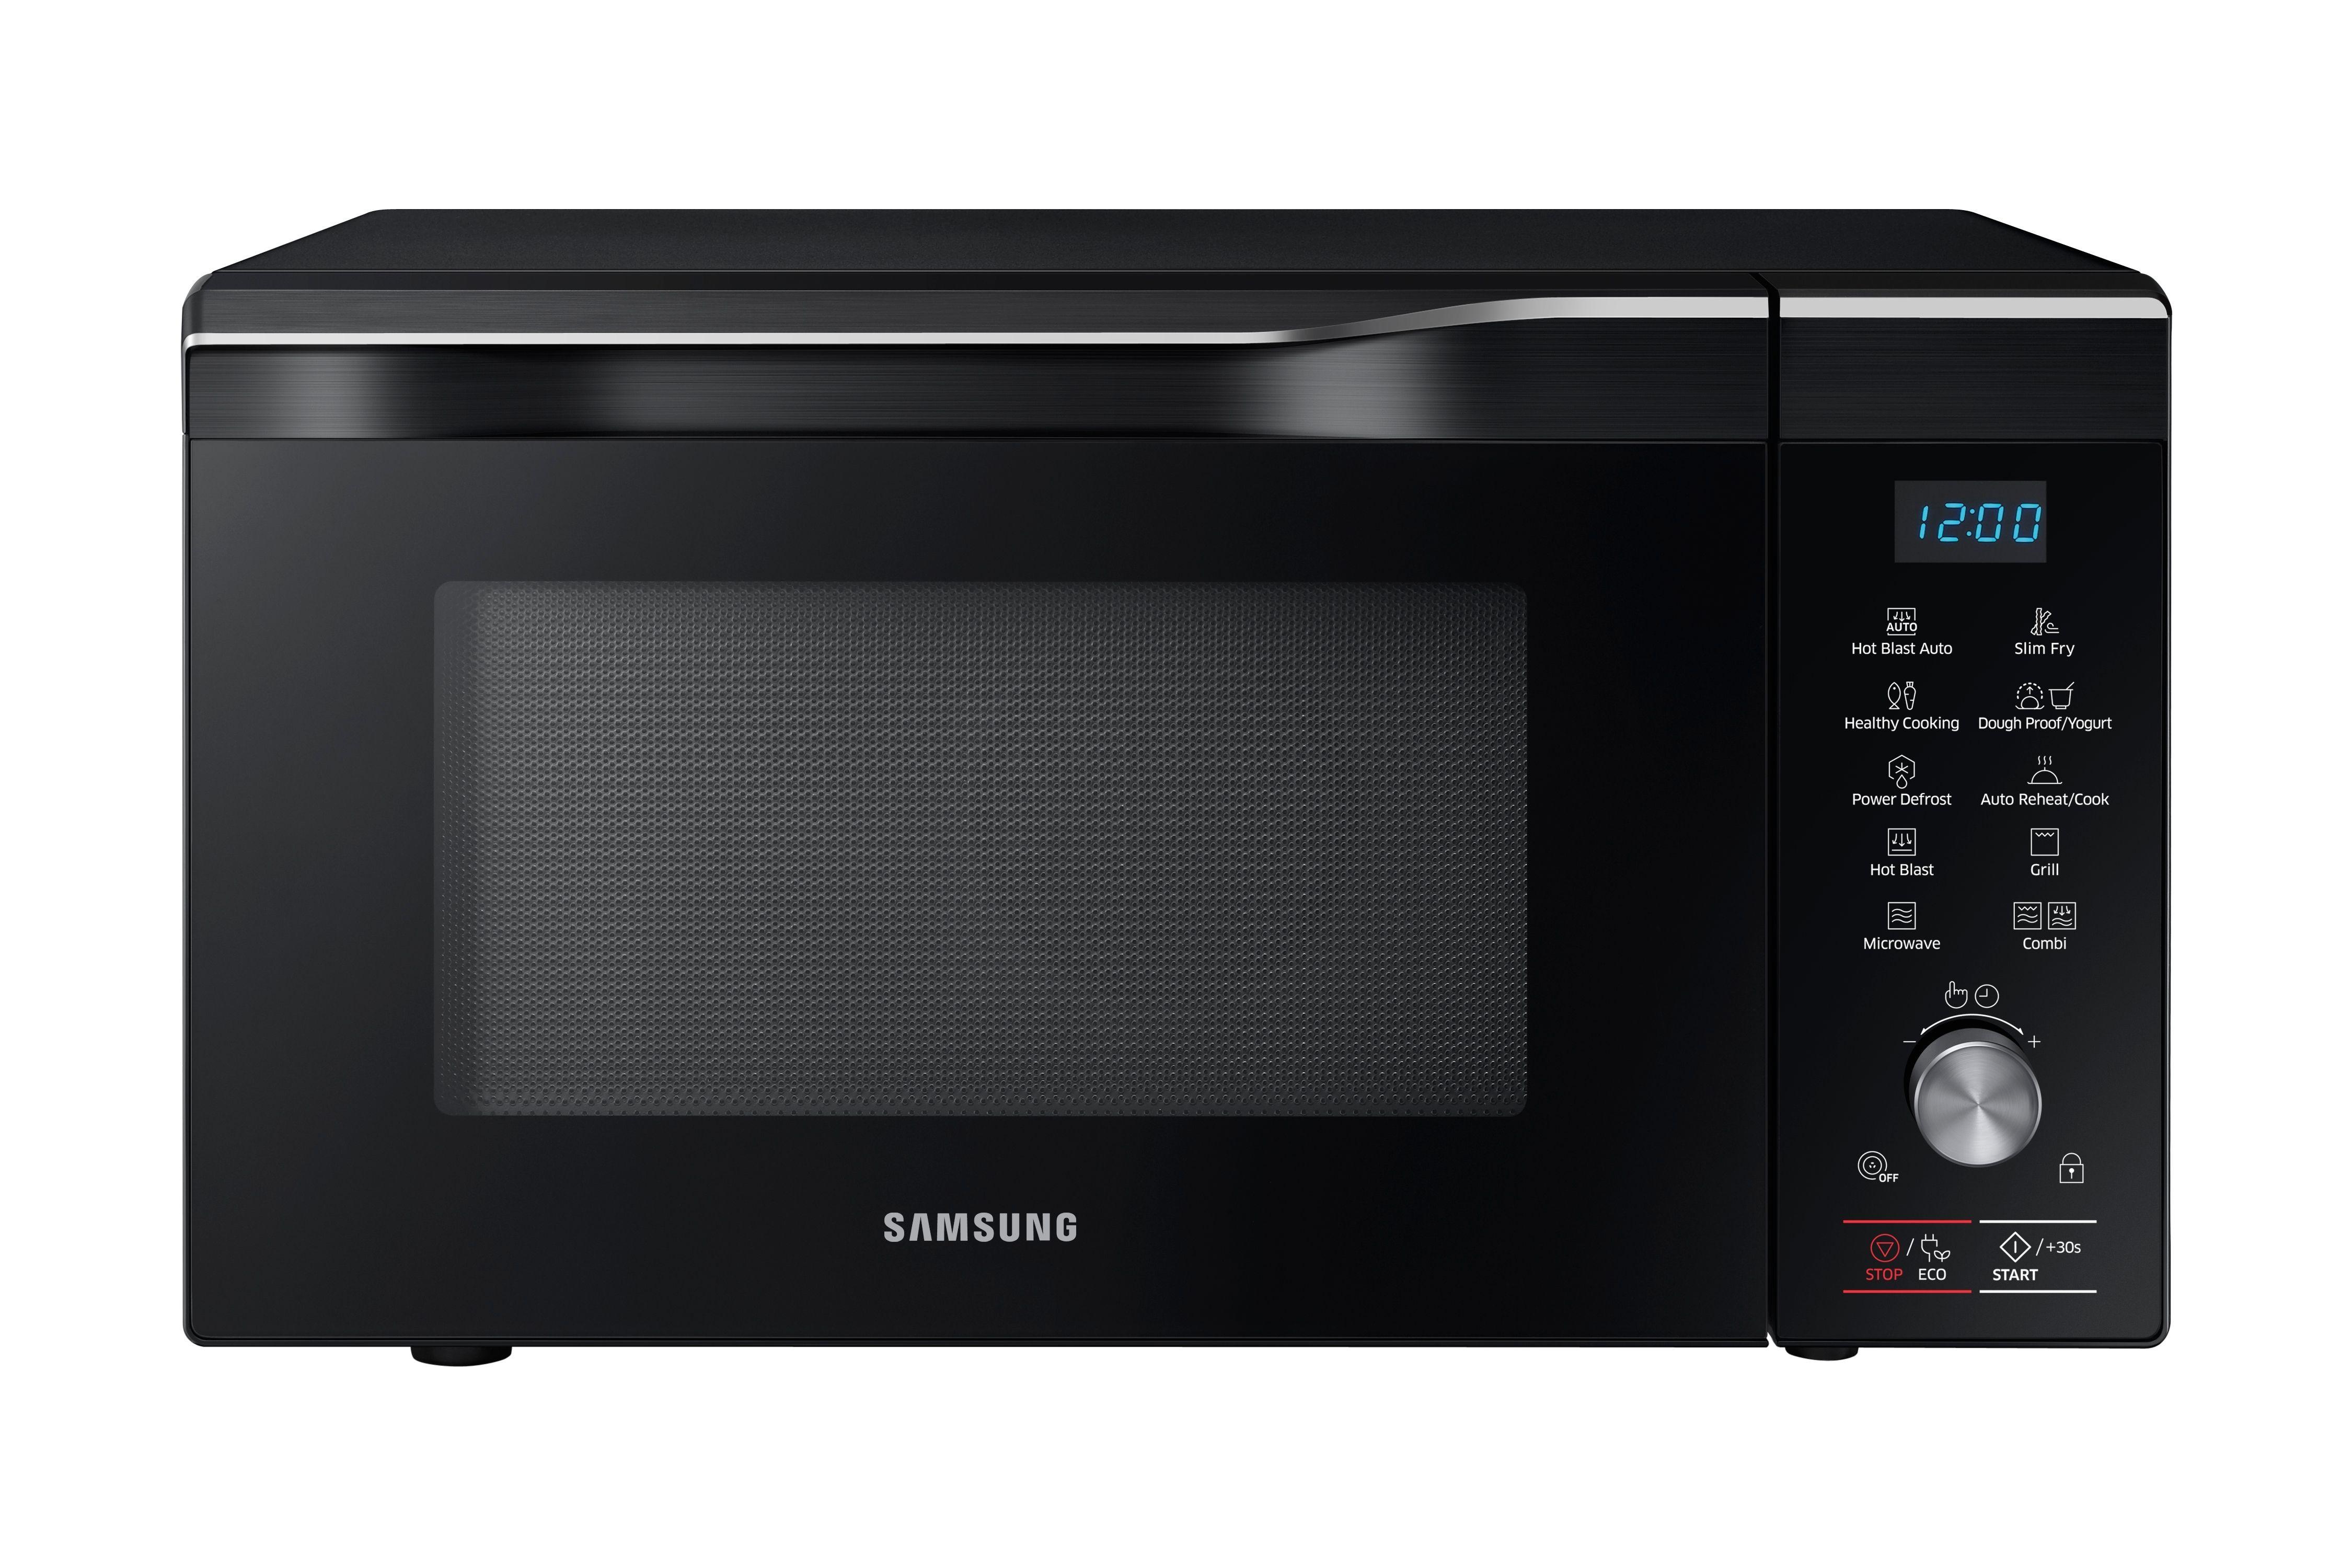 Samsung Appliance Logo - Home Appliances: Appliances for your Home